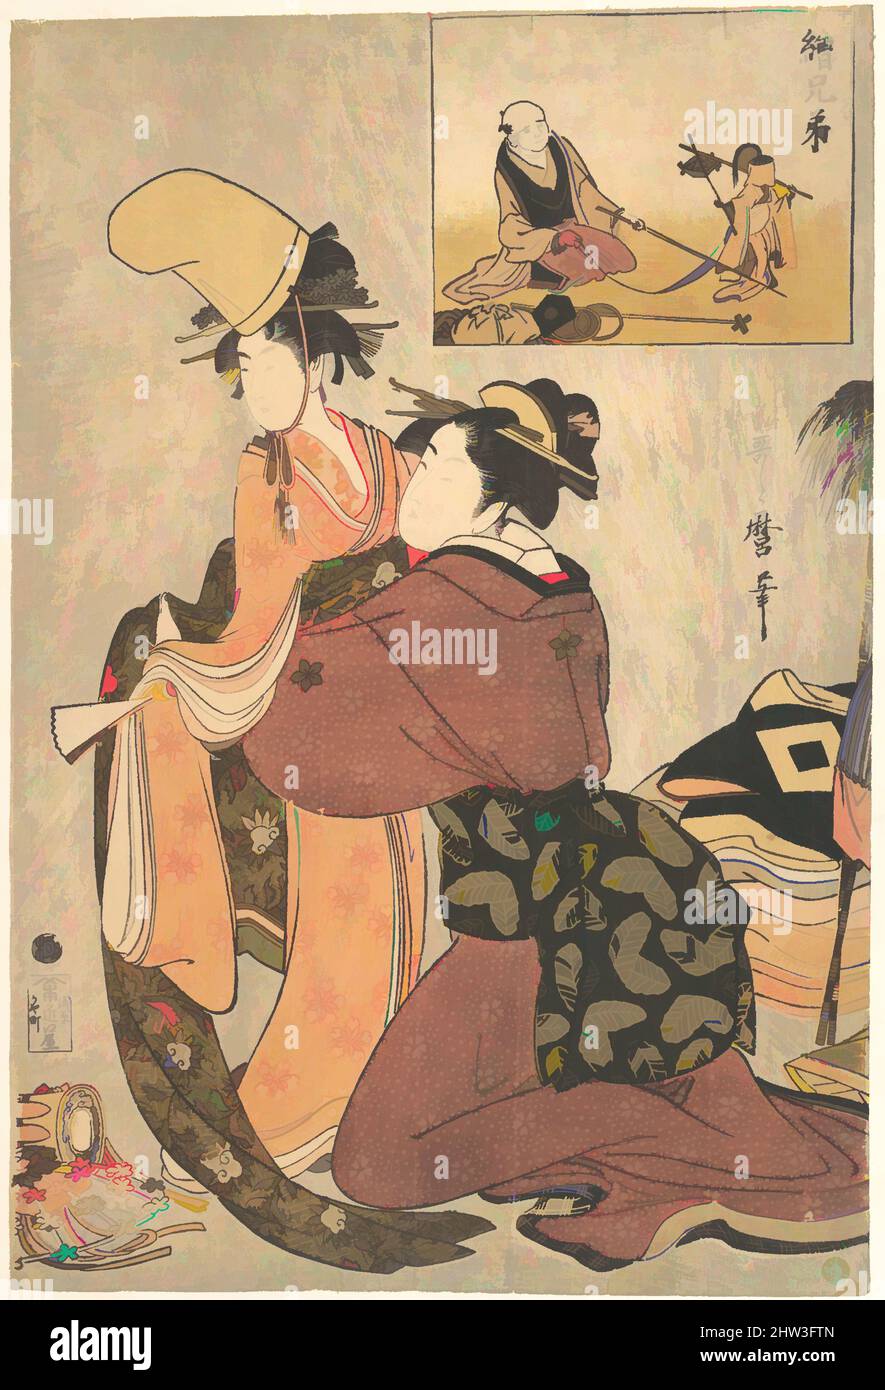 Art inspired by 絵兄弟, A Woman Dressing a Girl for a Kabuki Dance (E-kyodai), Edo period (1615–1868), 1790s, Japan, Polychrome woodblock print; ink and color on paper, H. 15 1/4 in. (38.7 cm); W. 10 1/8 in. (25.7 cm), Prints, Kitagawa Utamaro (Japanese, 1753?–1806), The Ukiyo-e artist, Classic works modernized by Artotop with a splash of modernity. Shapes, color and value, eye-catching visual impact on art. Emotions through freedom of artworks in a contemporary way. A timeless message pursuing a wildly creative new direction. Artists turning to the digital medium and creating the Artotop NFT Stock Photo